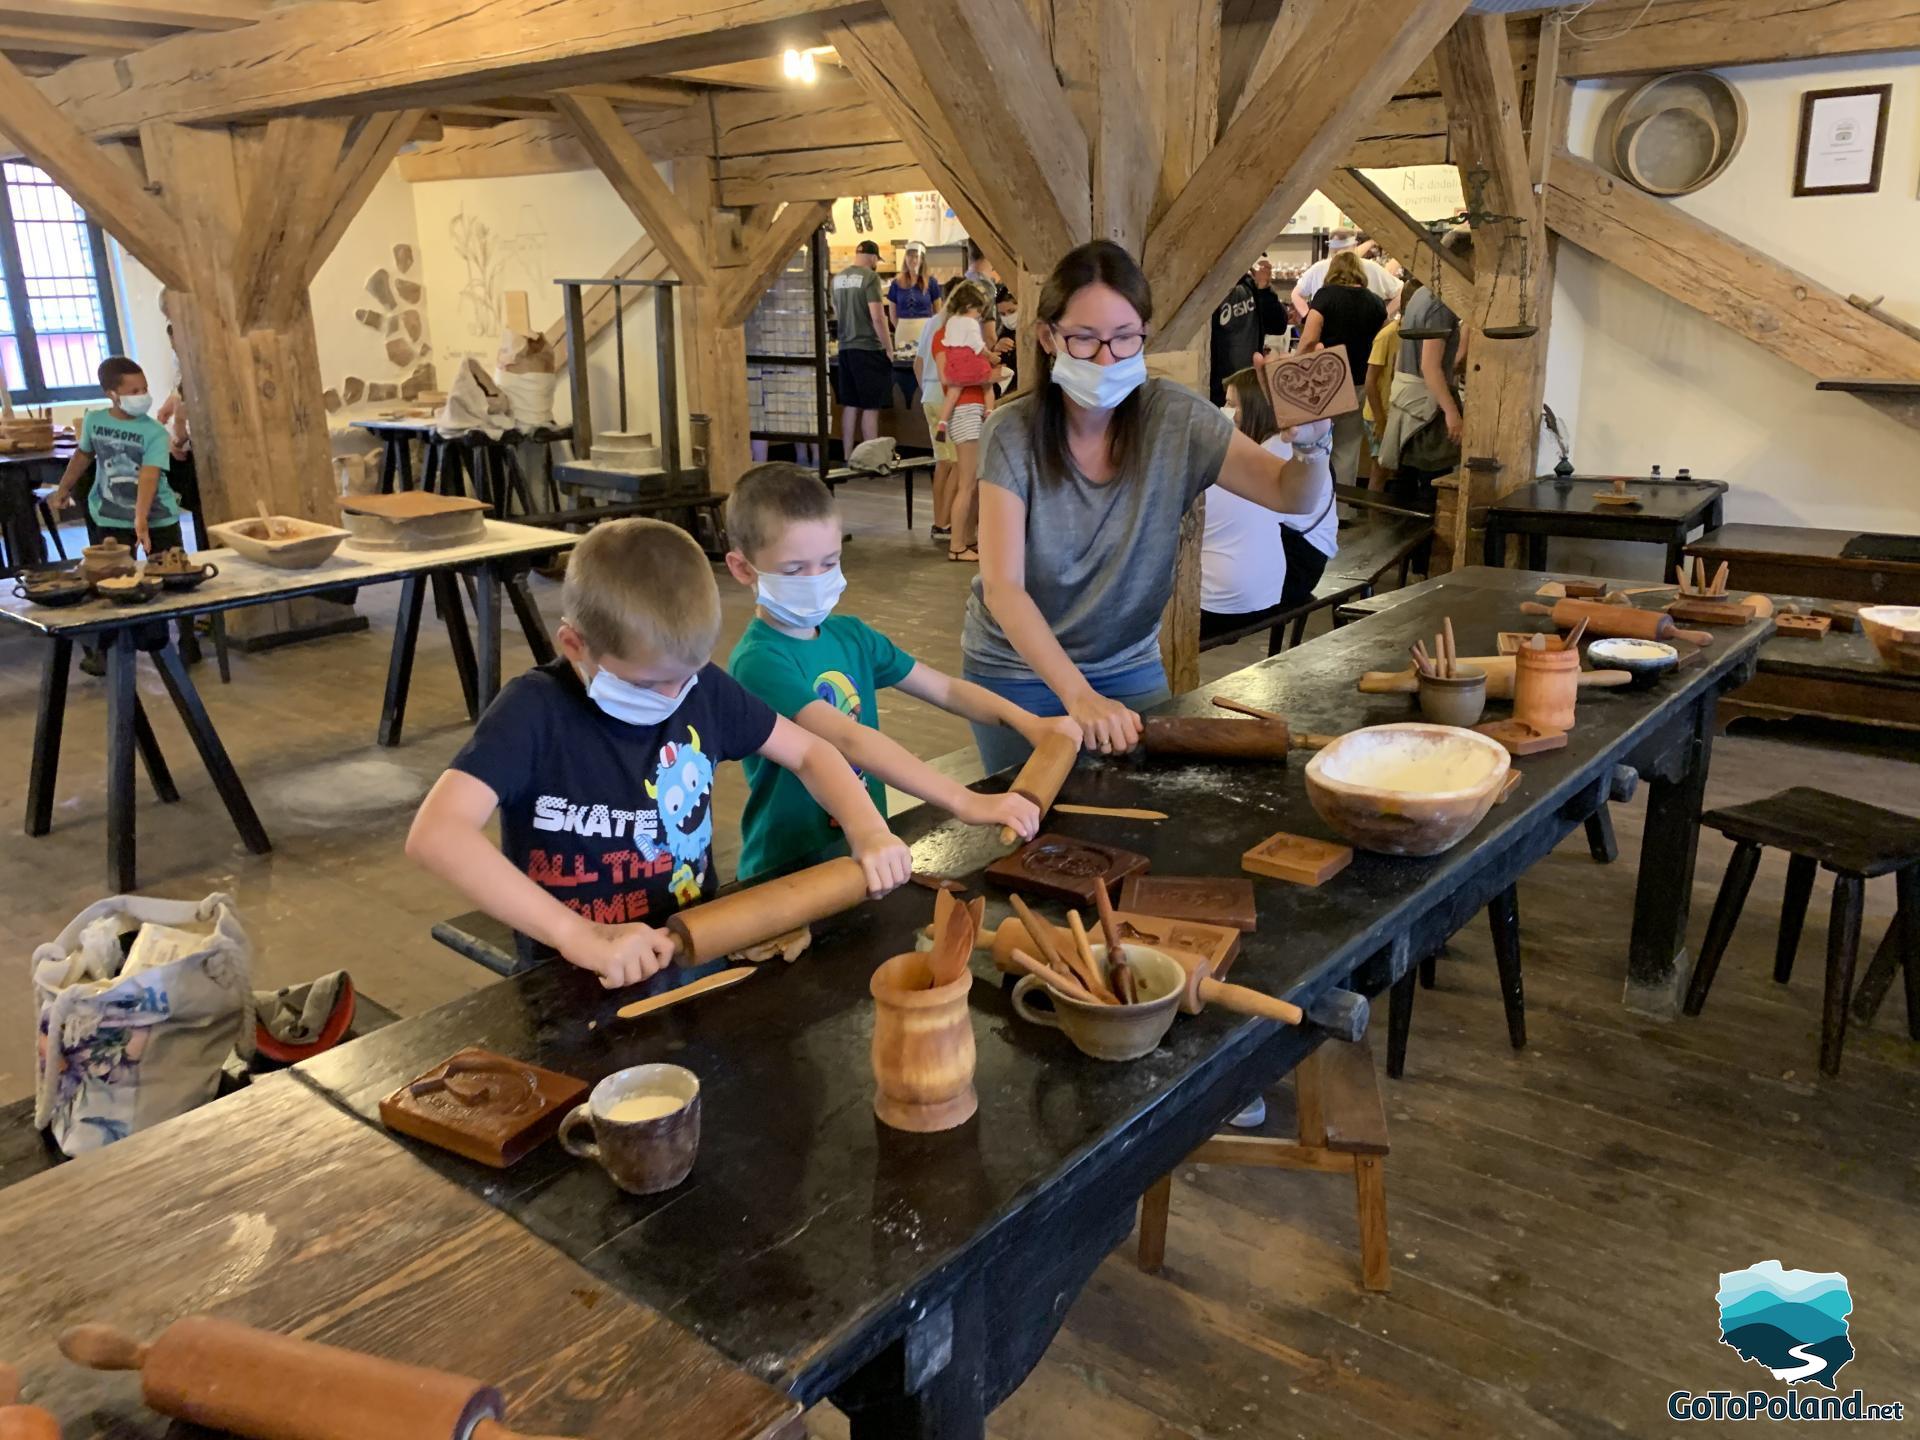 a woman and two children are in a room where they participate in gingerbread baking, they have gingerbread dough, rolling pins and various molds on the table